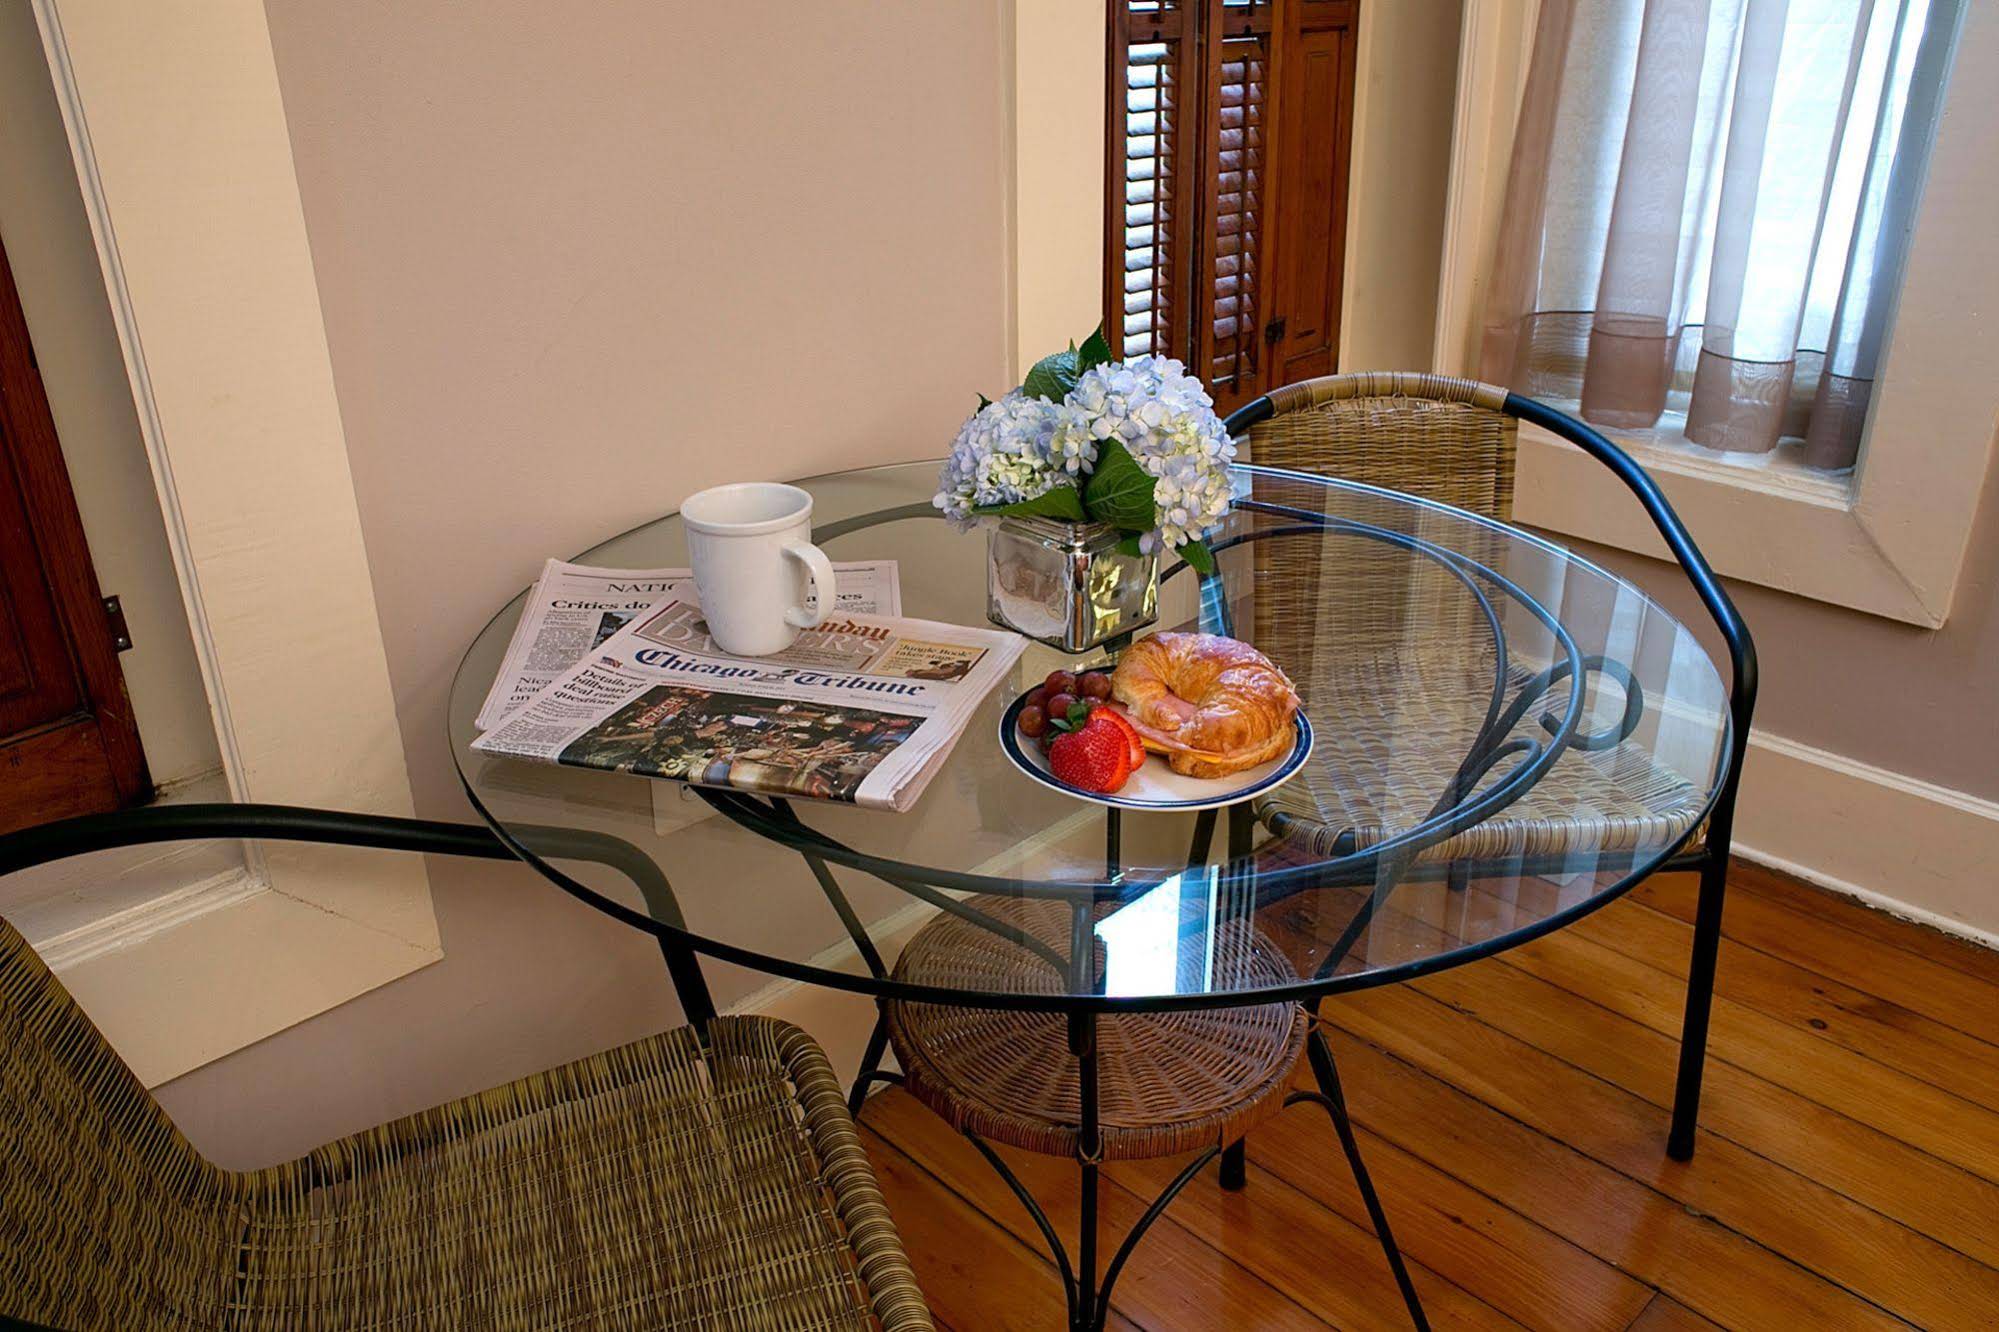 The Wicker Park Inn, a Chicago Bed and Breakfast